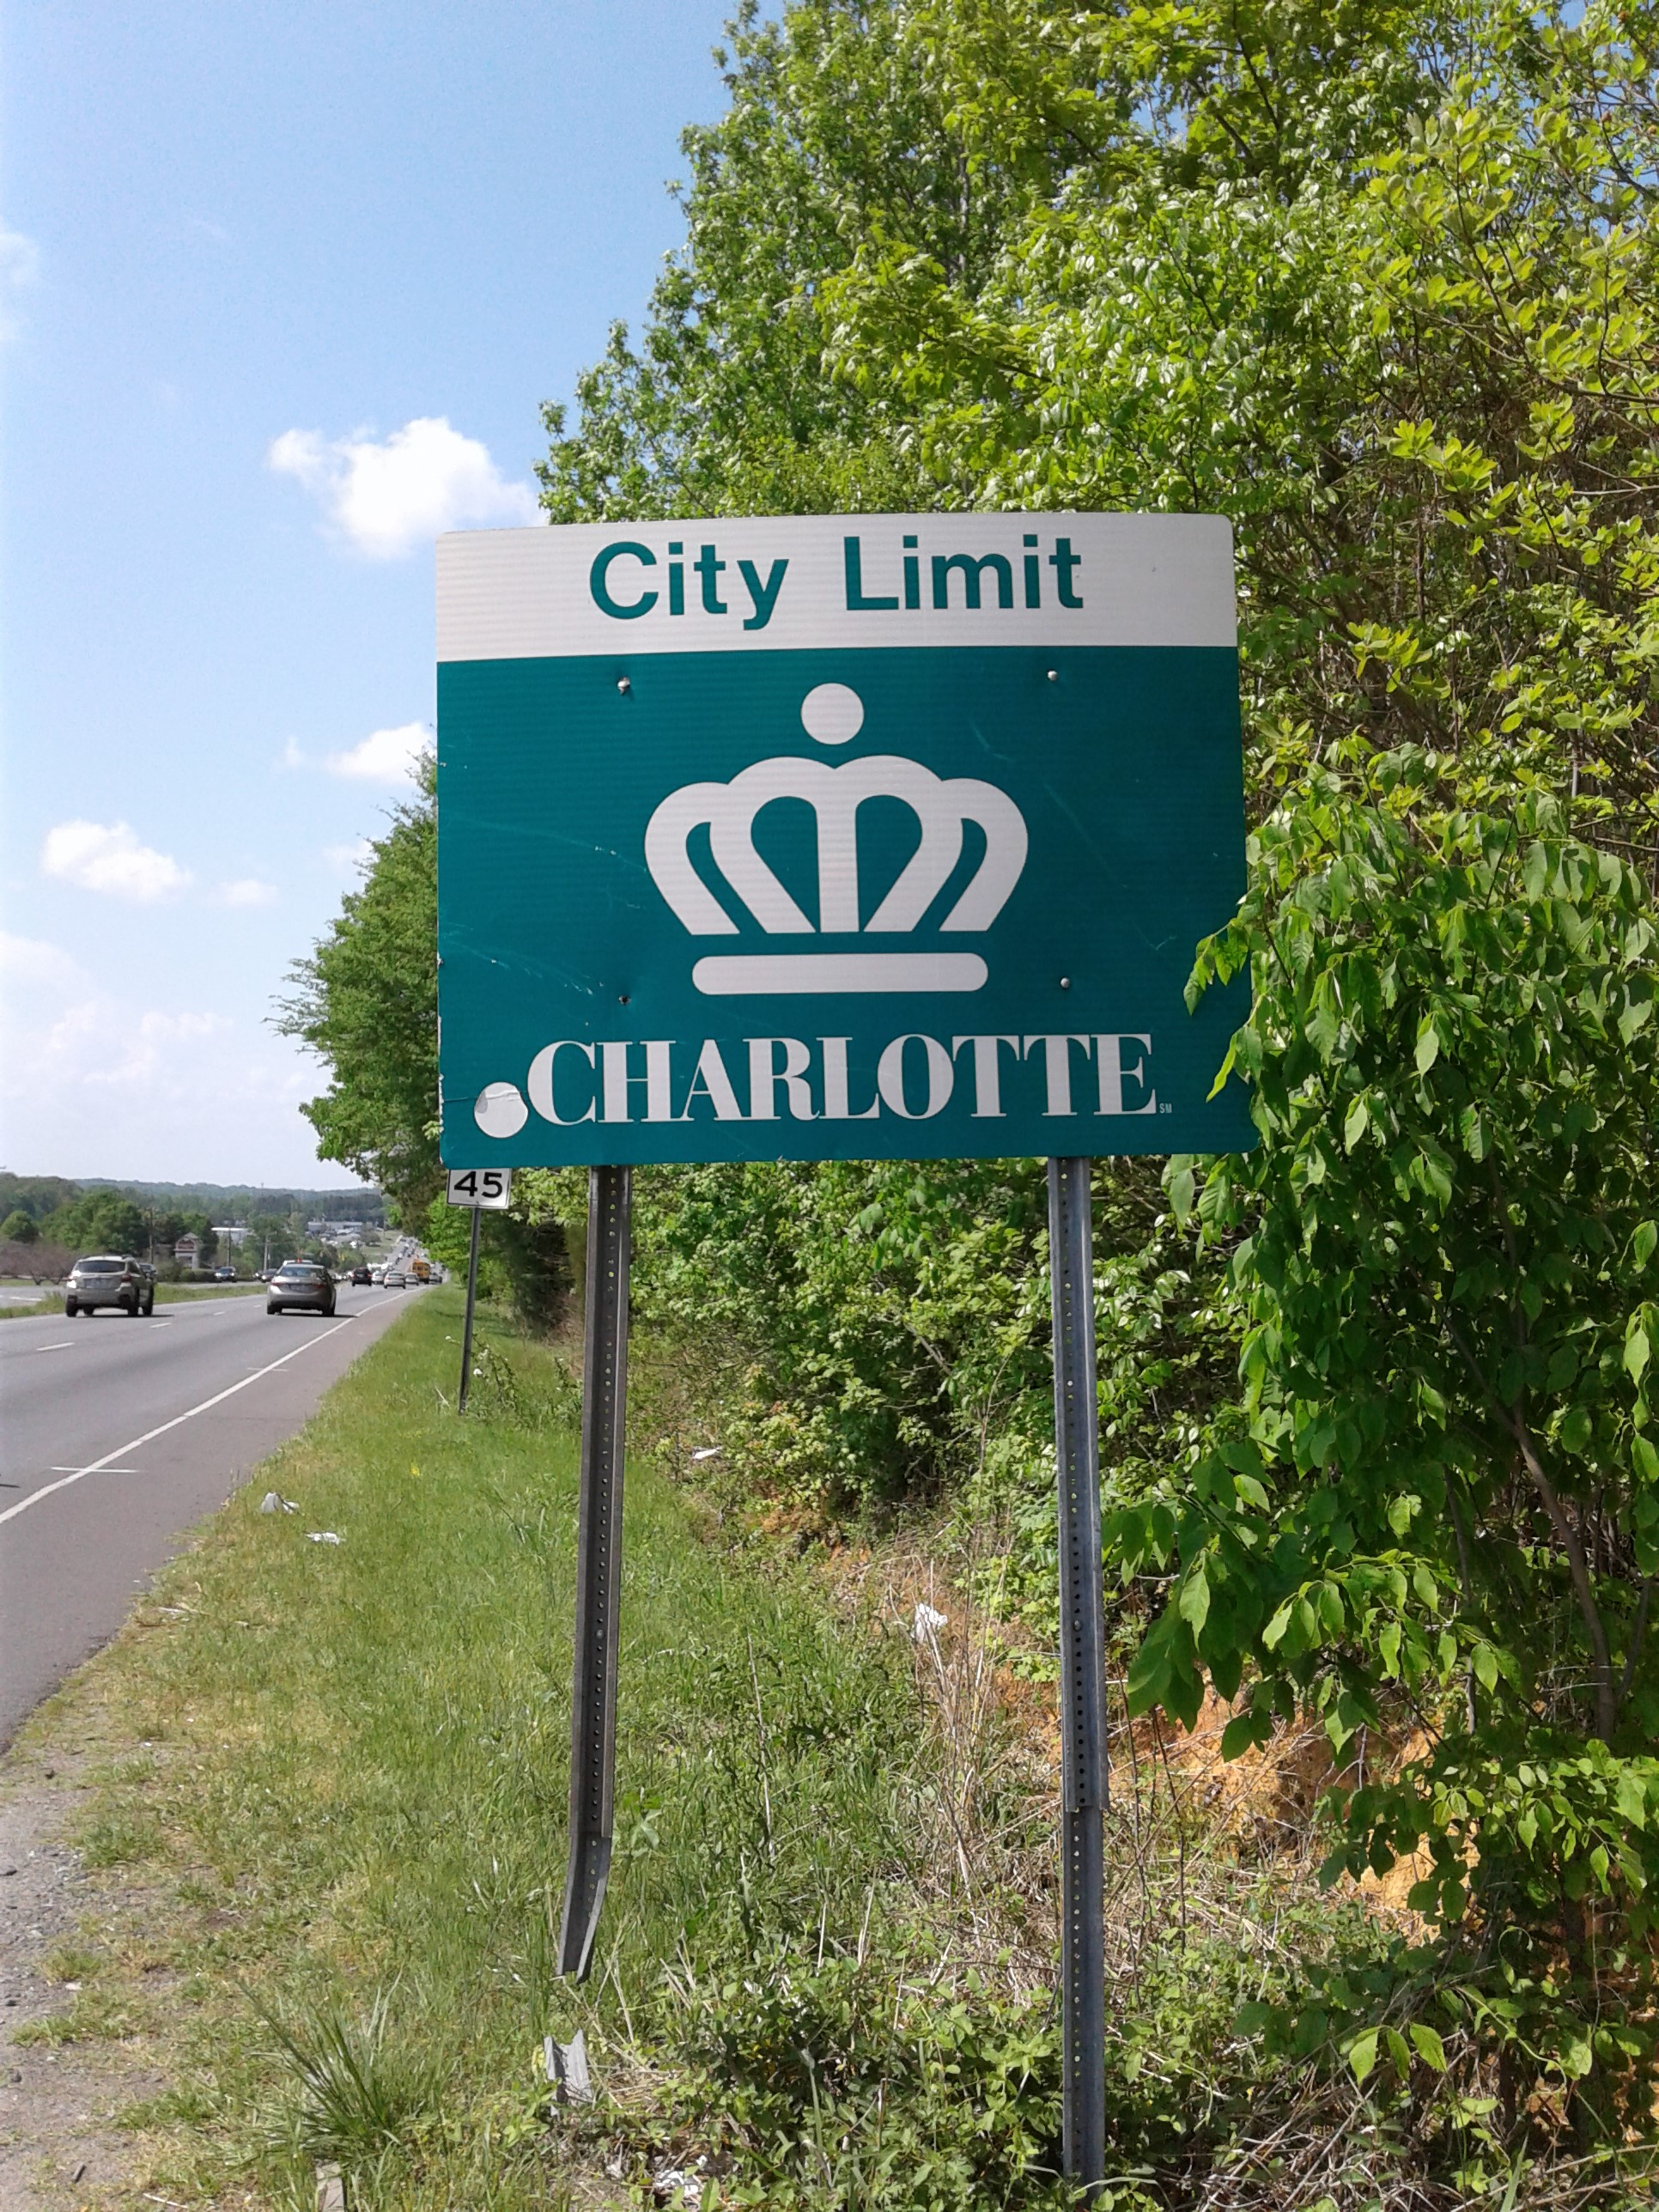 Charlotte disputes report that drinking water could be unsafe | News ...